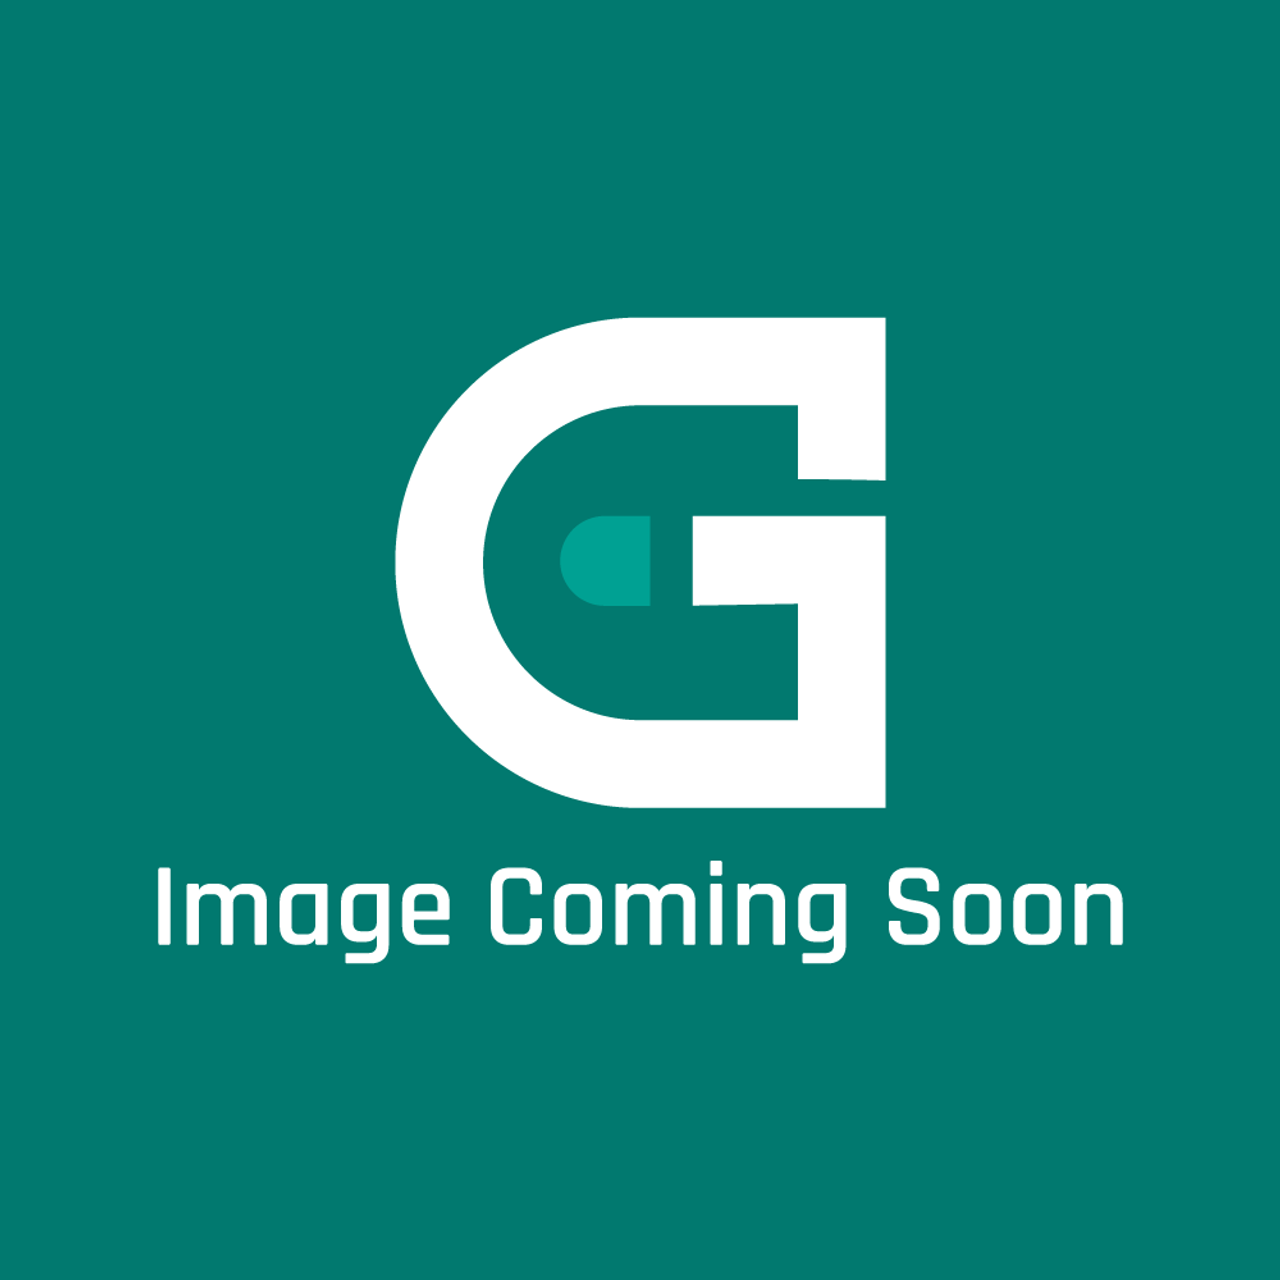 Groen 100955 - Gas Safety Switch Harnes S - Image Coming Soon!